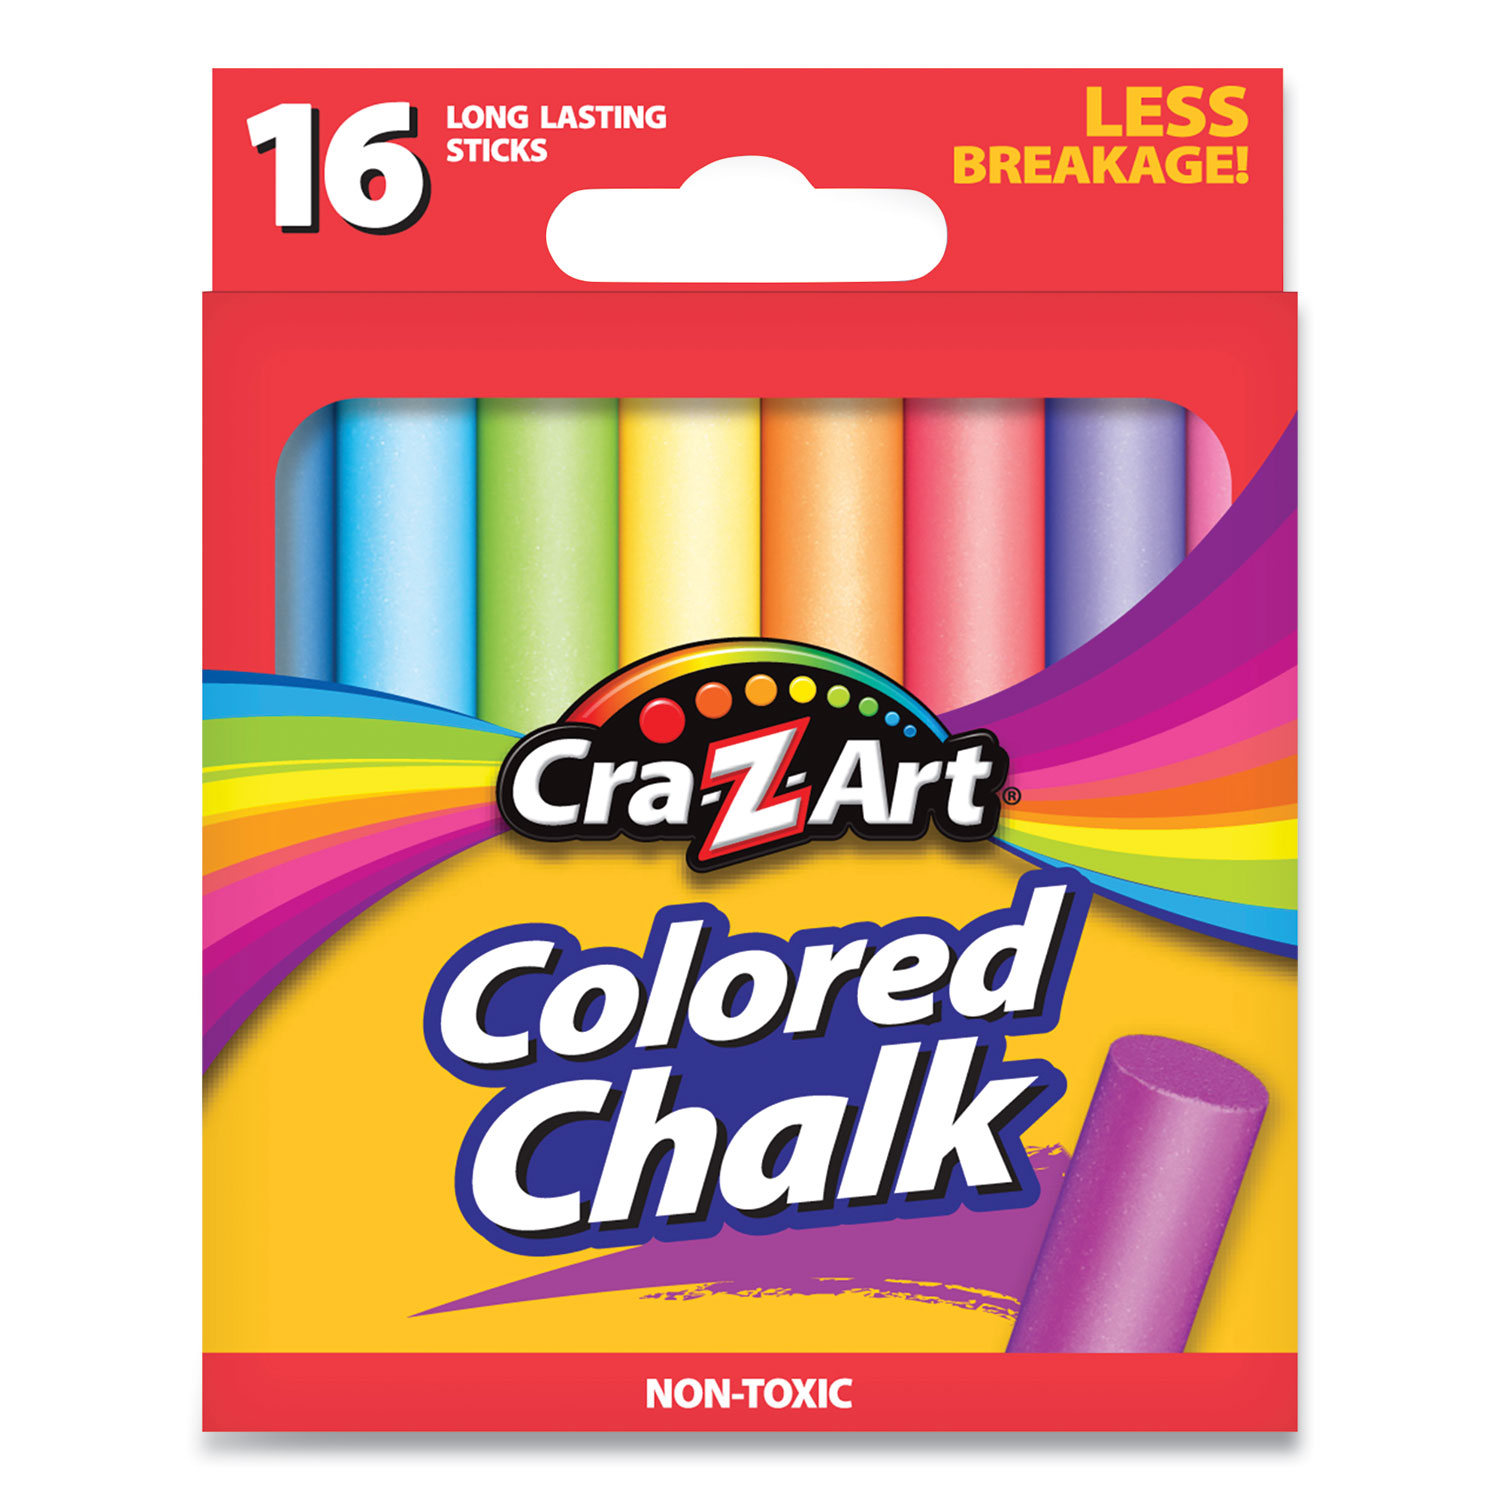 Cra-Z-Art® Colored Chalk, Assorted Colors, 16/Pack